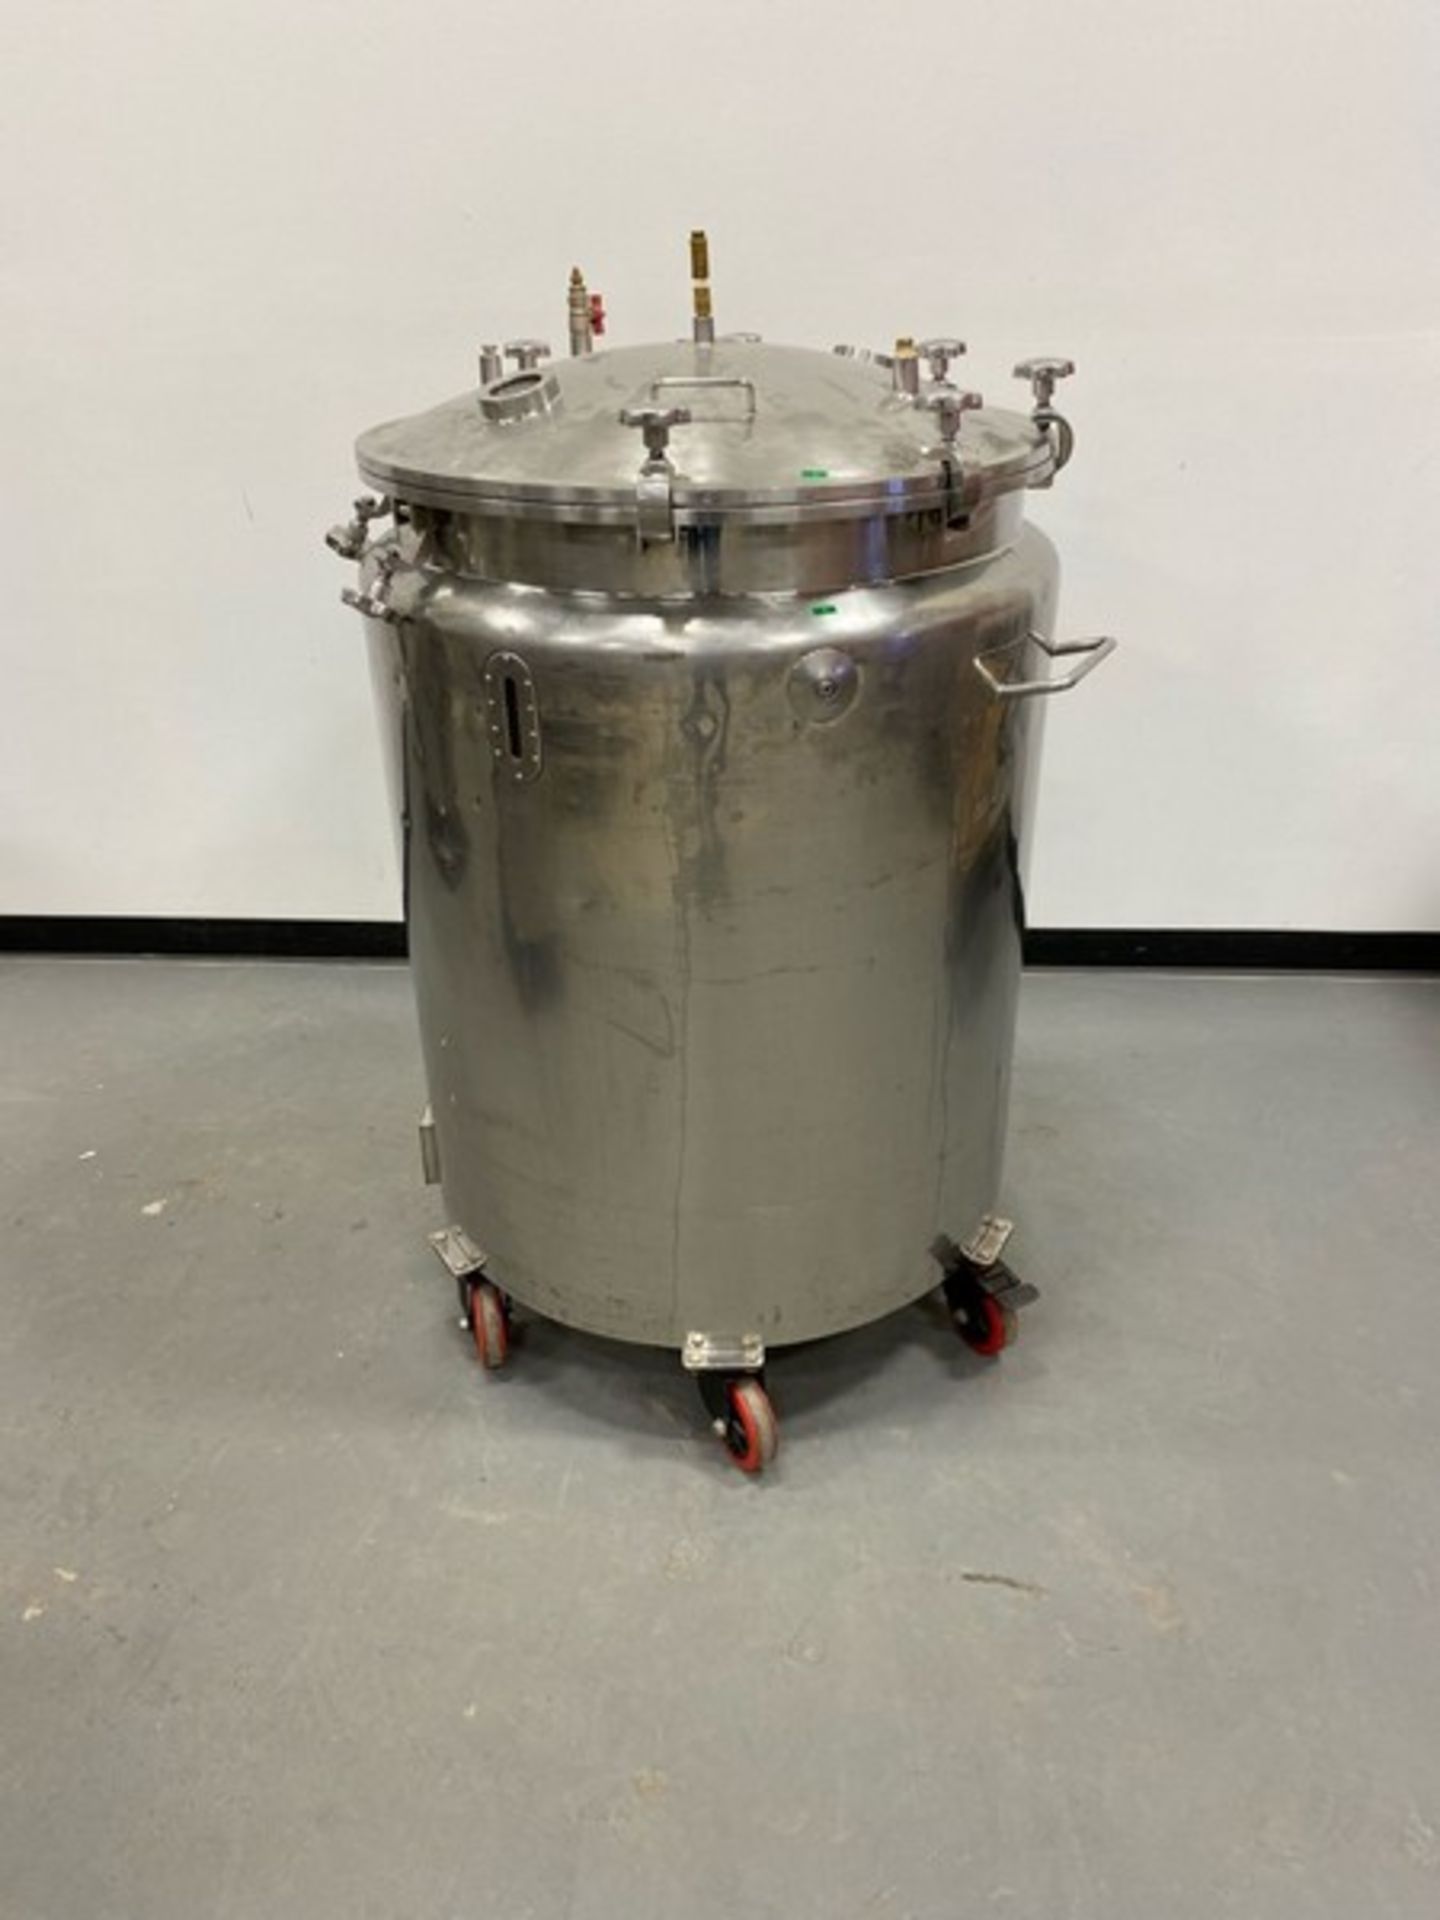 Stainless Steel Tank. 30inch diameter 32 straight wall. On wheels. As shown in photos. No Reserve (